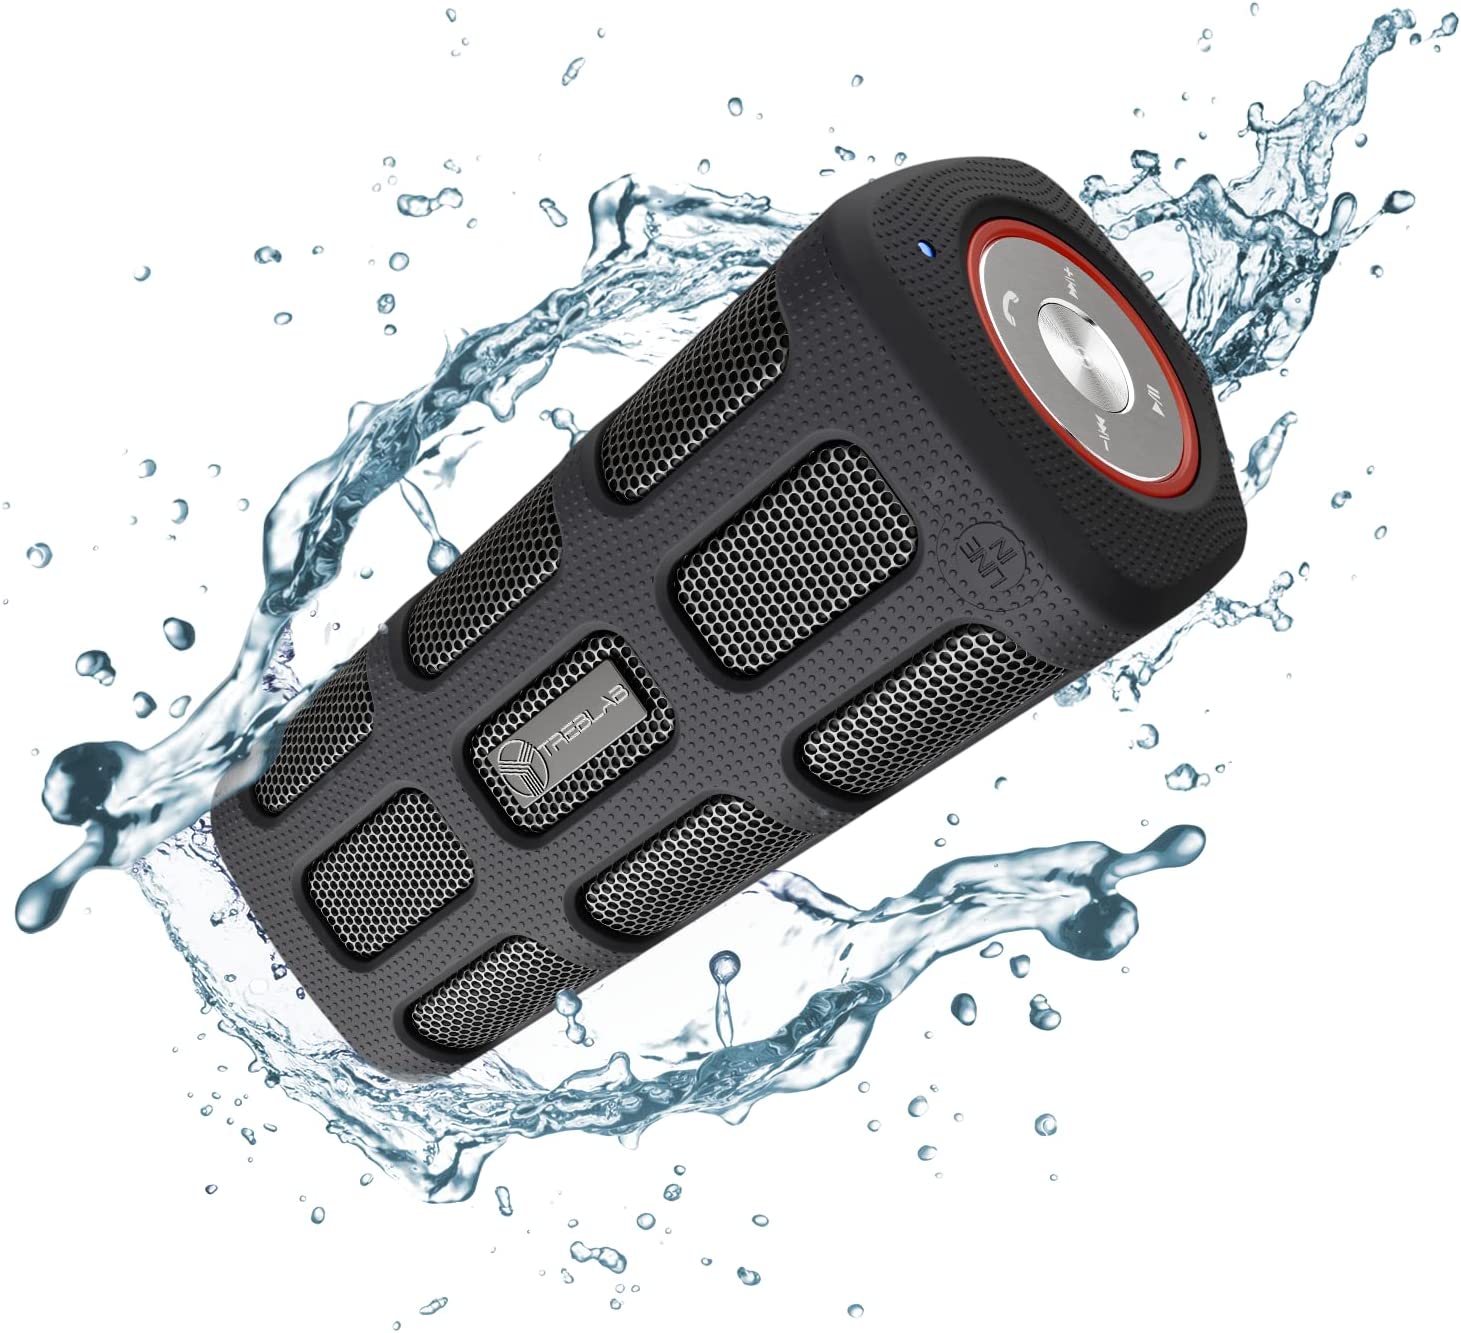 TREBLAB FX100 Portable Bluetooth Speaker, Rugged Outdoor Speaker for Extreme Sports and Adventures, IPX4 Waterproof with Metal and Rubber Body, Connects to Smartphones & PCs, Up to 35 hrs/Charge